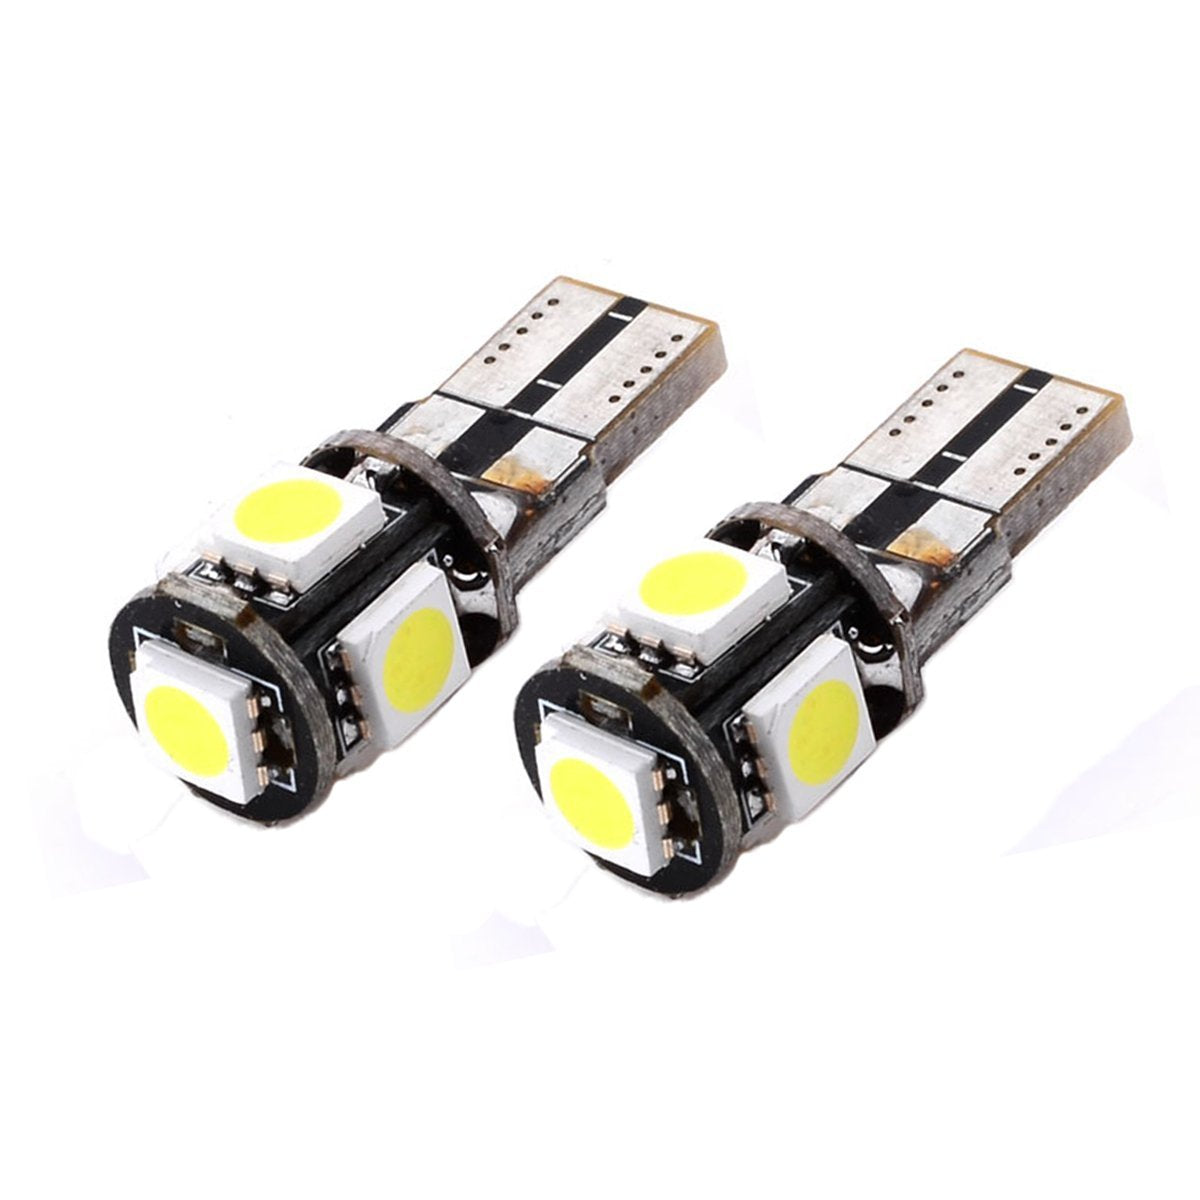 2x CANBUS ERROR FREE White T10 5-SMD 5050 LED Bulbs For Euro Car